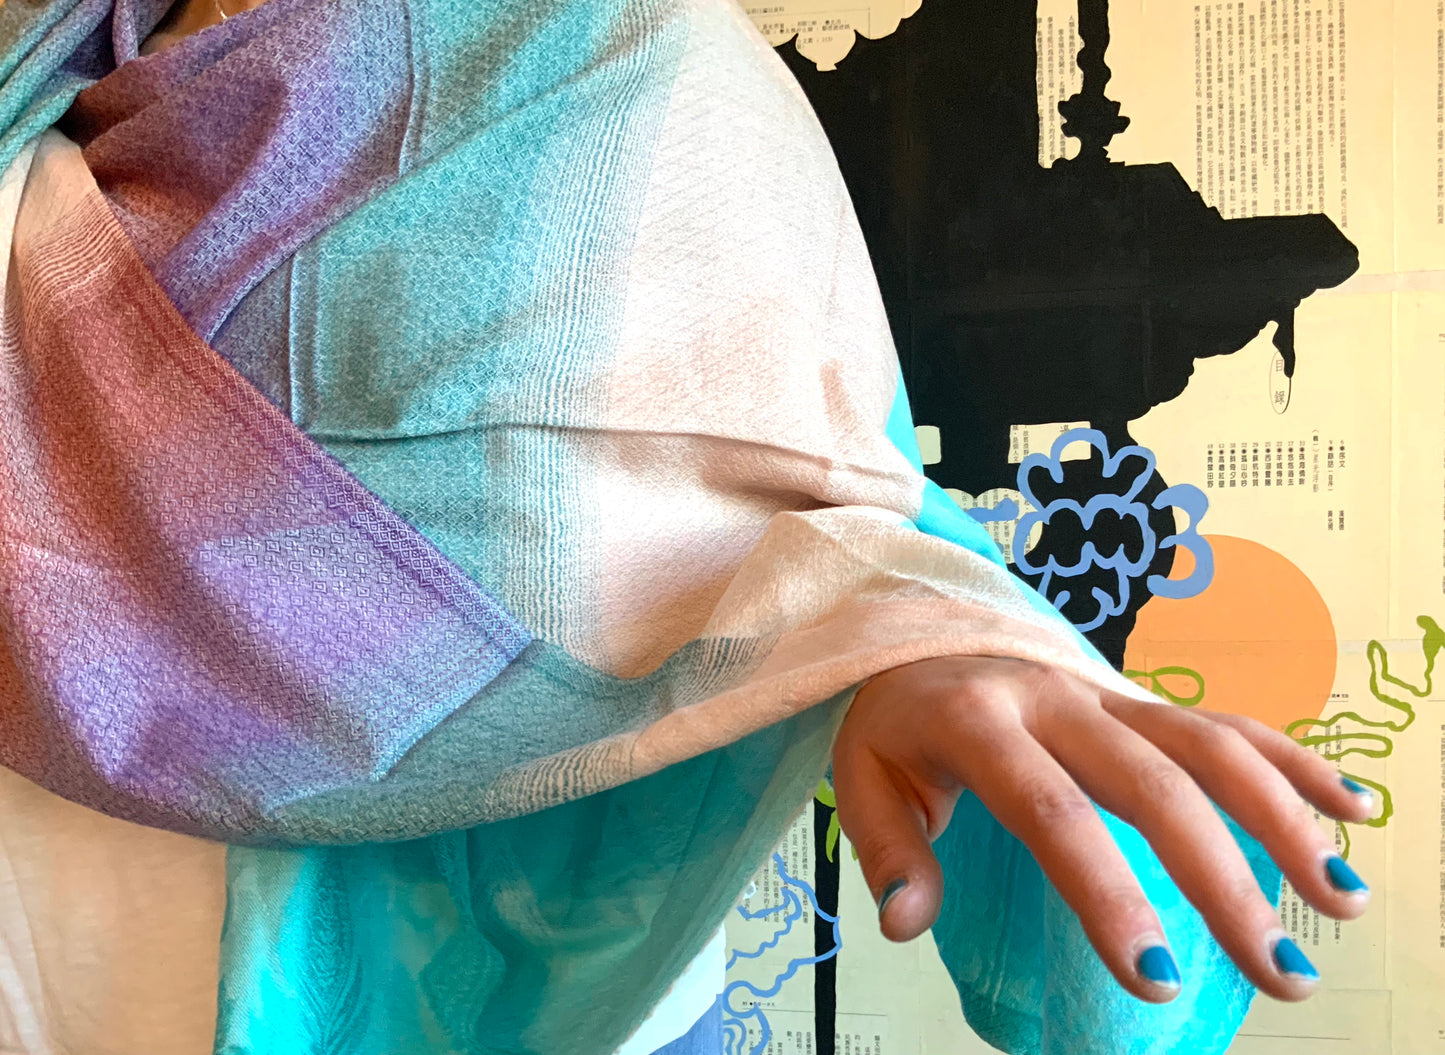 Modern Kashmir shawl in Turquoise, Pink and White #ModernKashmirShawl #NewShawlTrend #KashmirShawl - DharBazaar